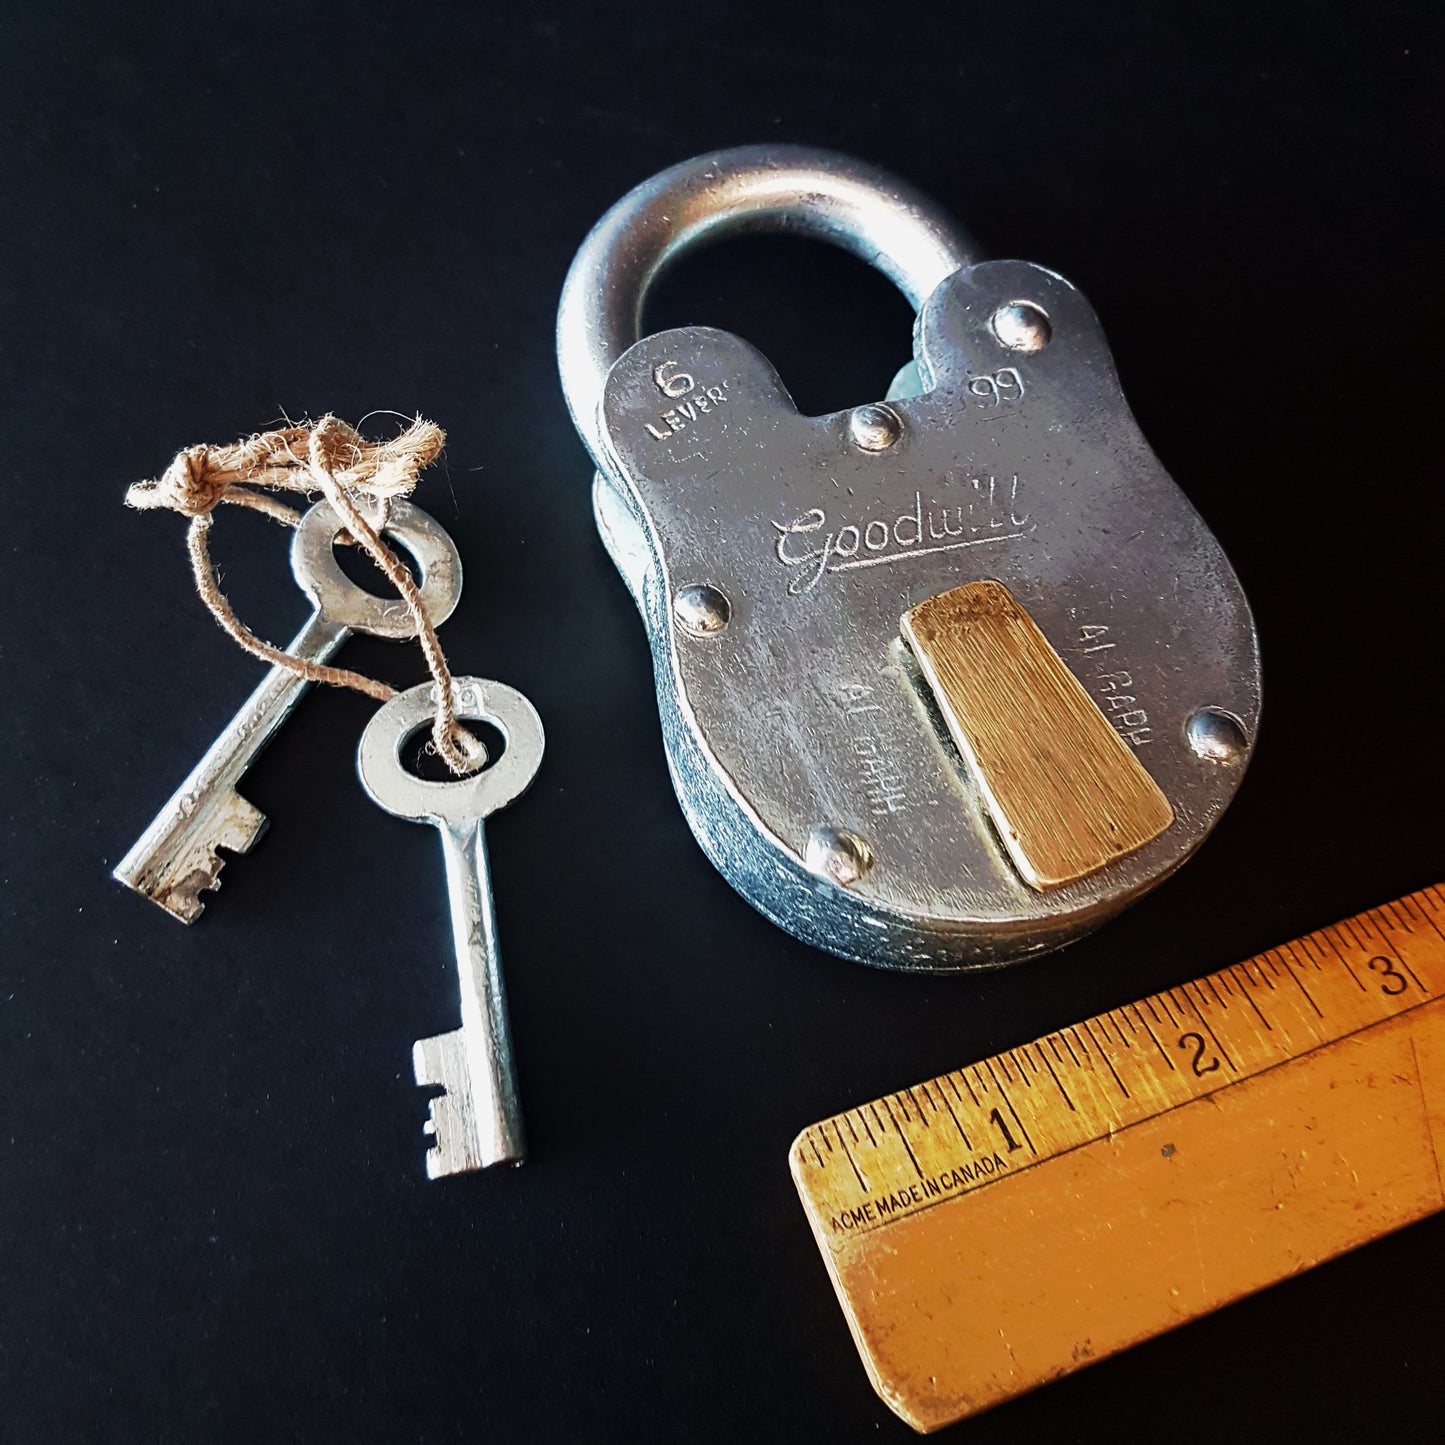 Heavy steel padlock 4.5 x 2.5 inches with 2 keys. Vintage silver polished finish. Antique nautical design. Multi purpose locking device.